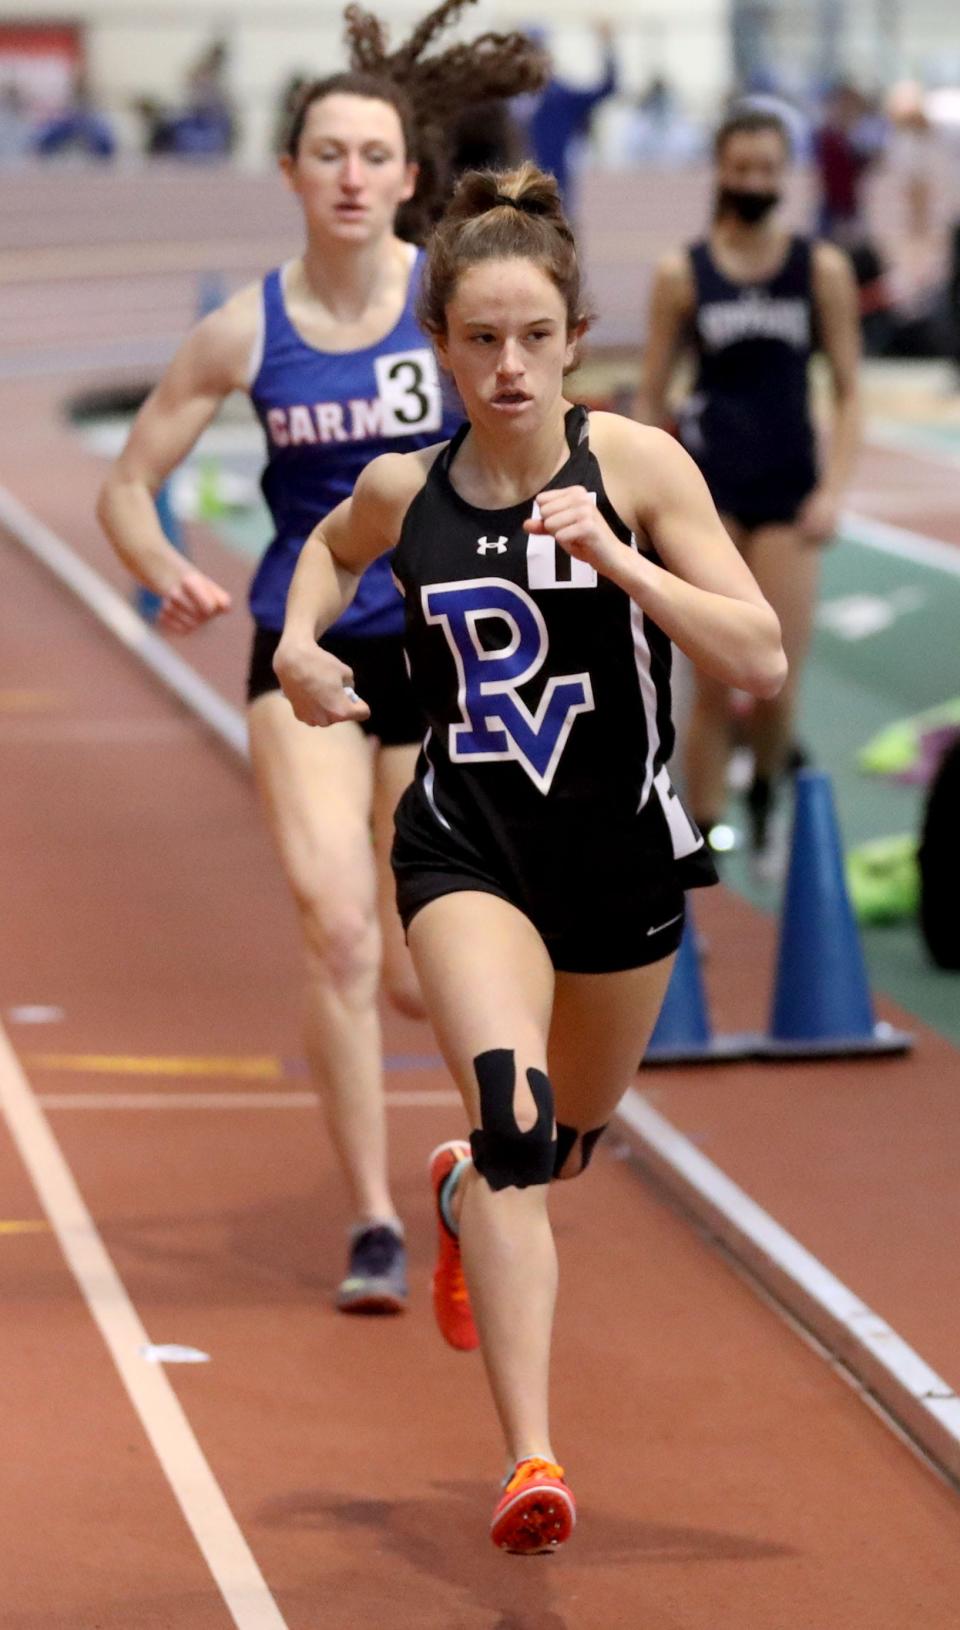 Gabriella Randazzo of Putnam Valley won the girls 1,000-meter race at the Northern Counties Indoor Track and Field Championships at the New Balance Armory in Manhattan Jan. 23, 2022.